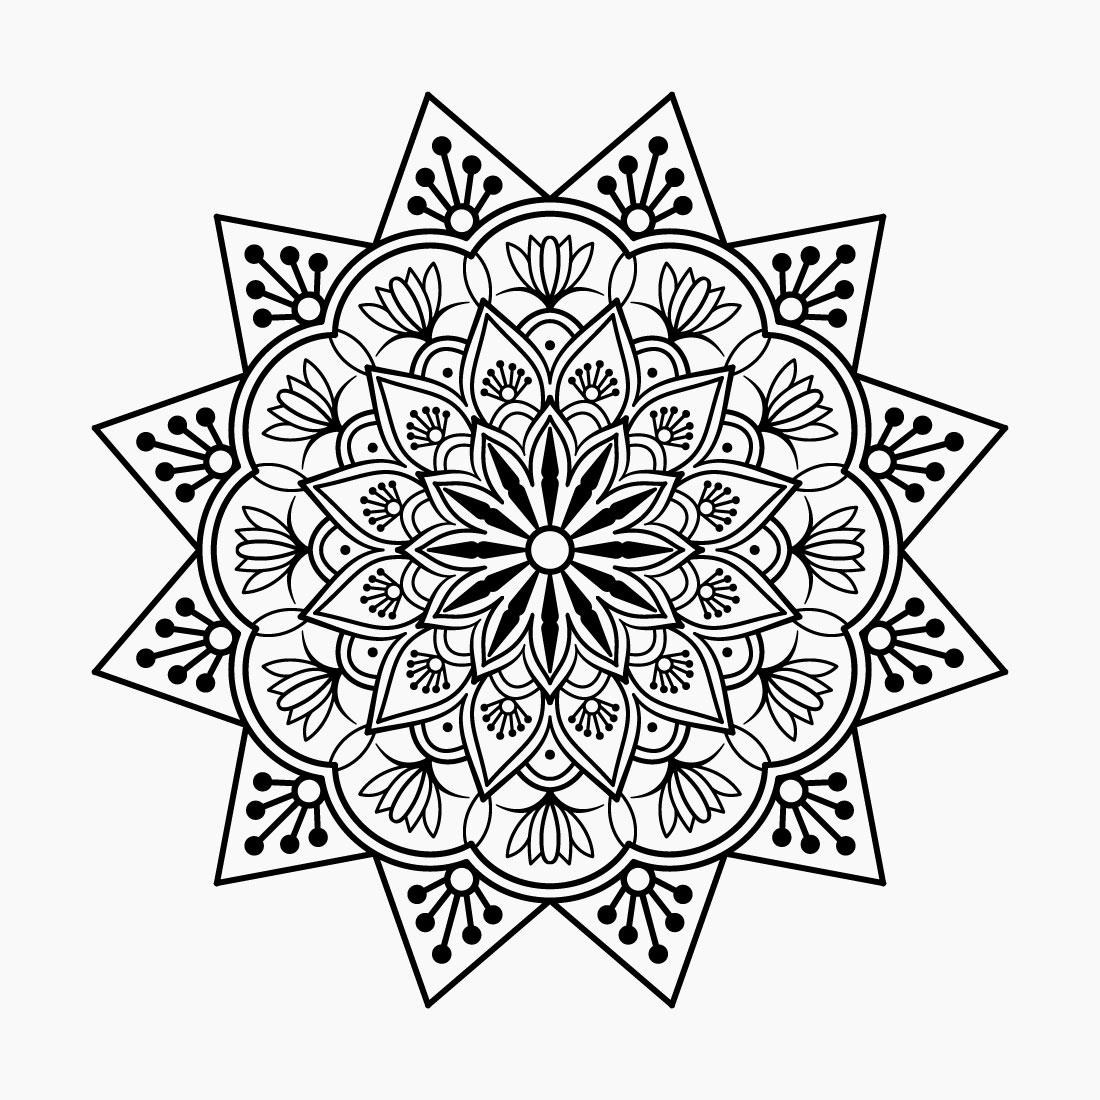 Creative Abstract Ornament Round Mandala Pattern Coloring Book cover image.